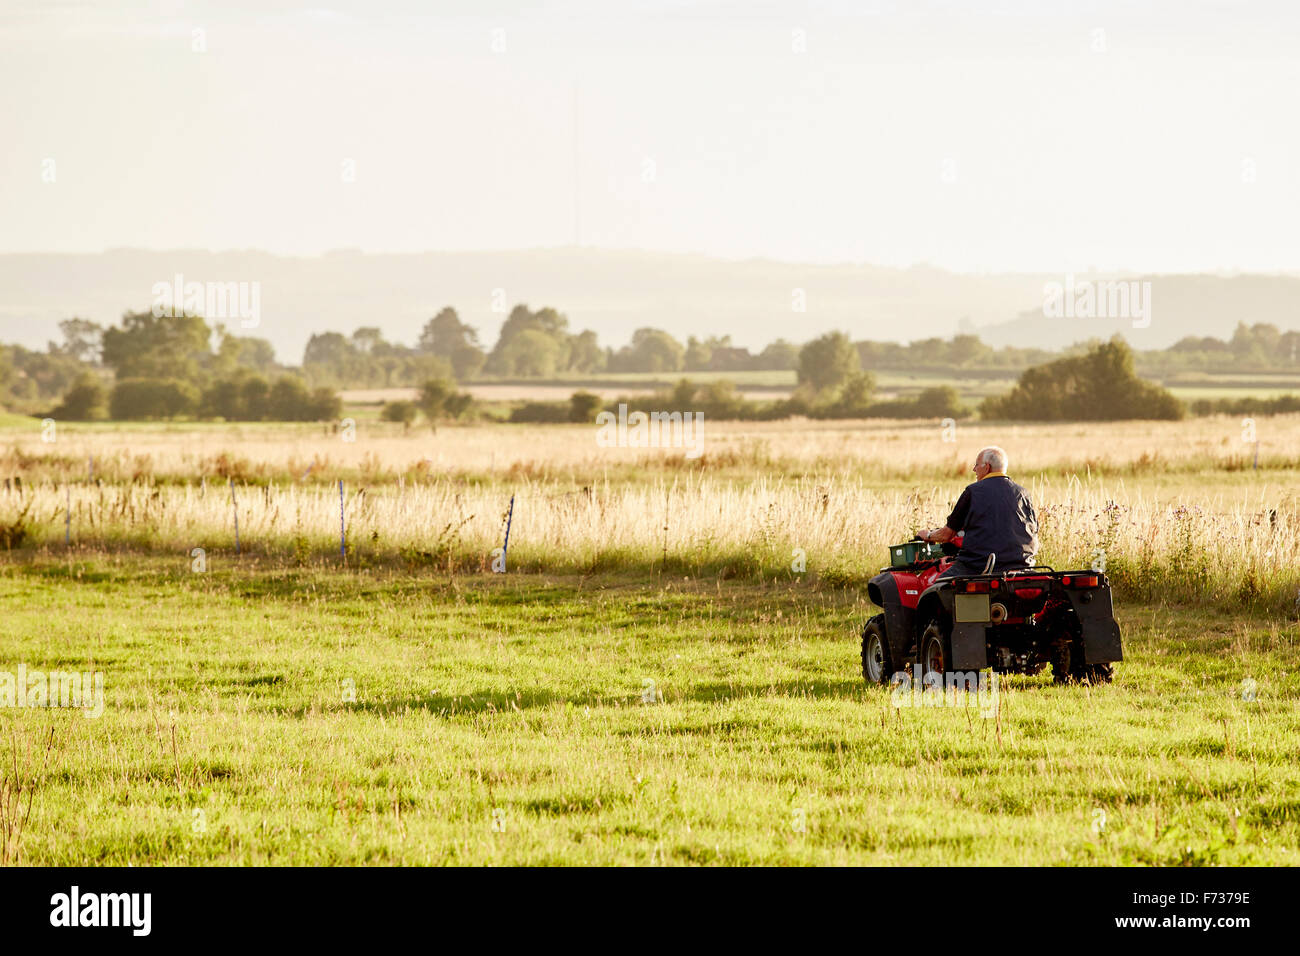 A man on a quadbike driving across a field. Stock Photo